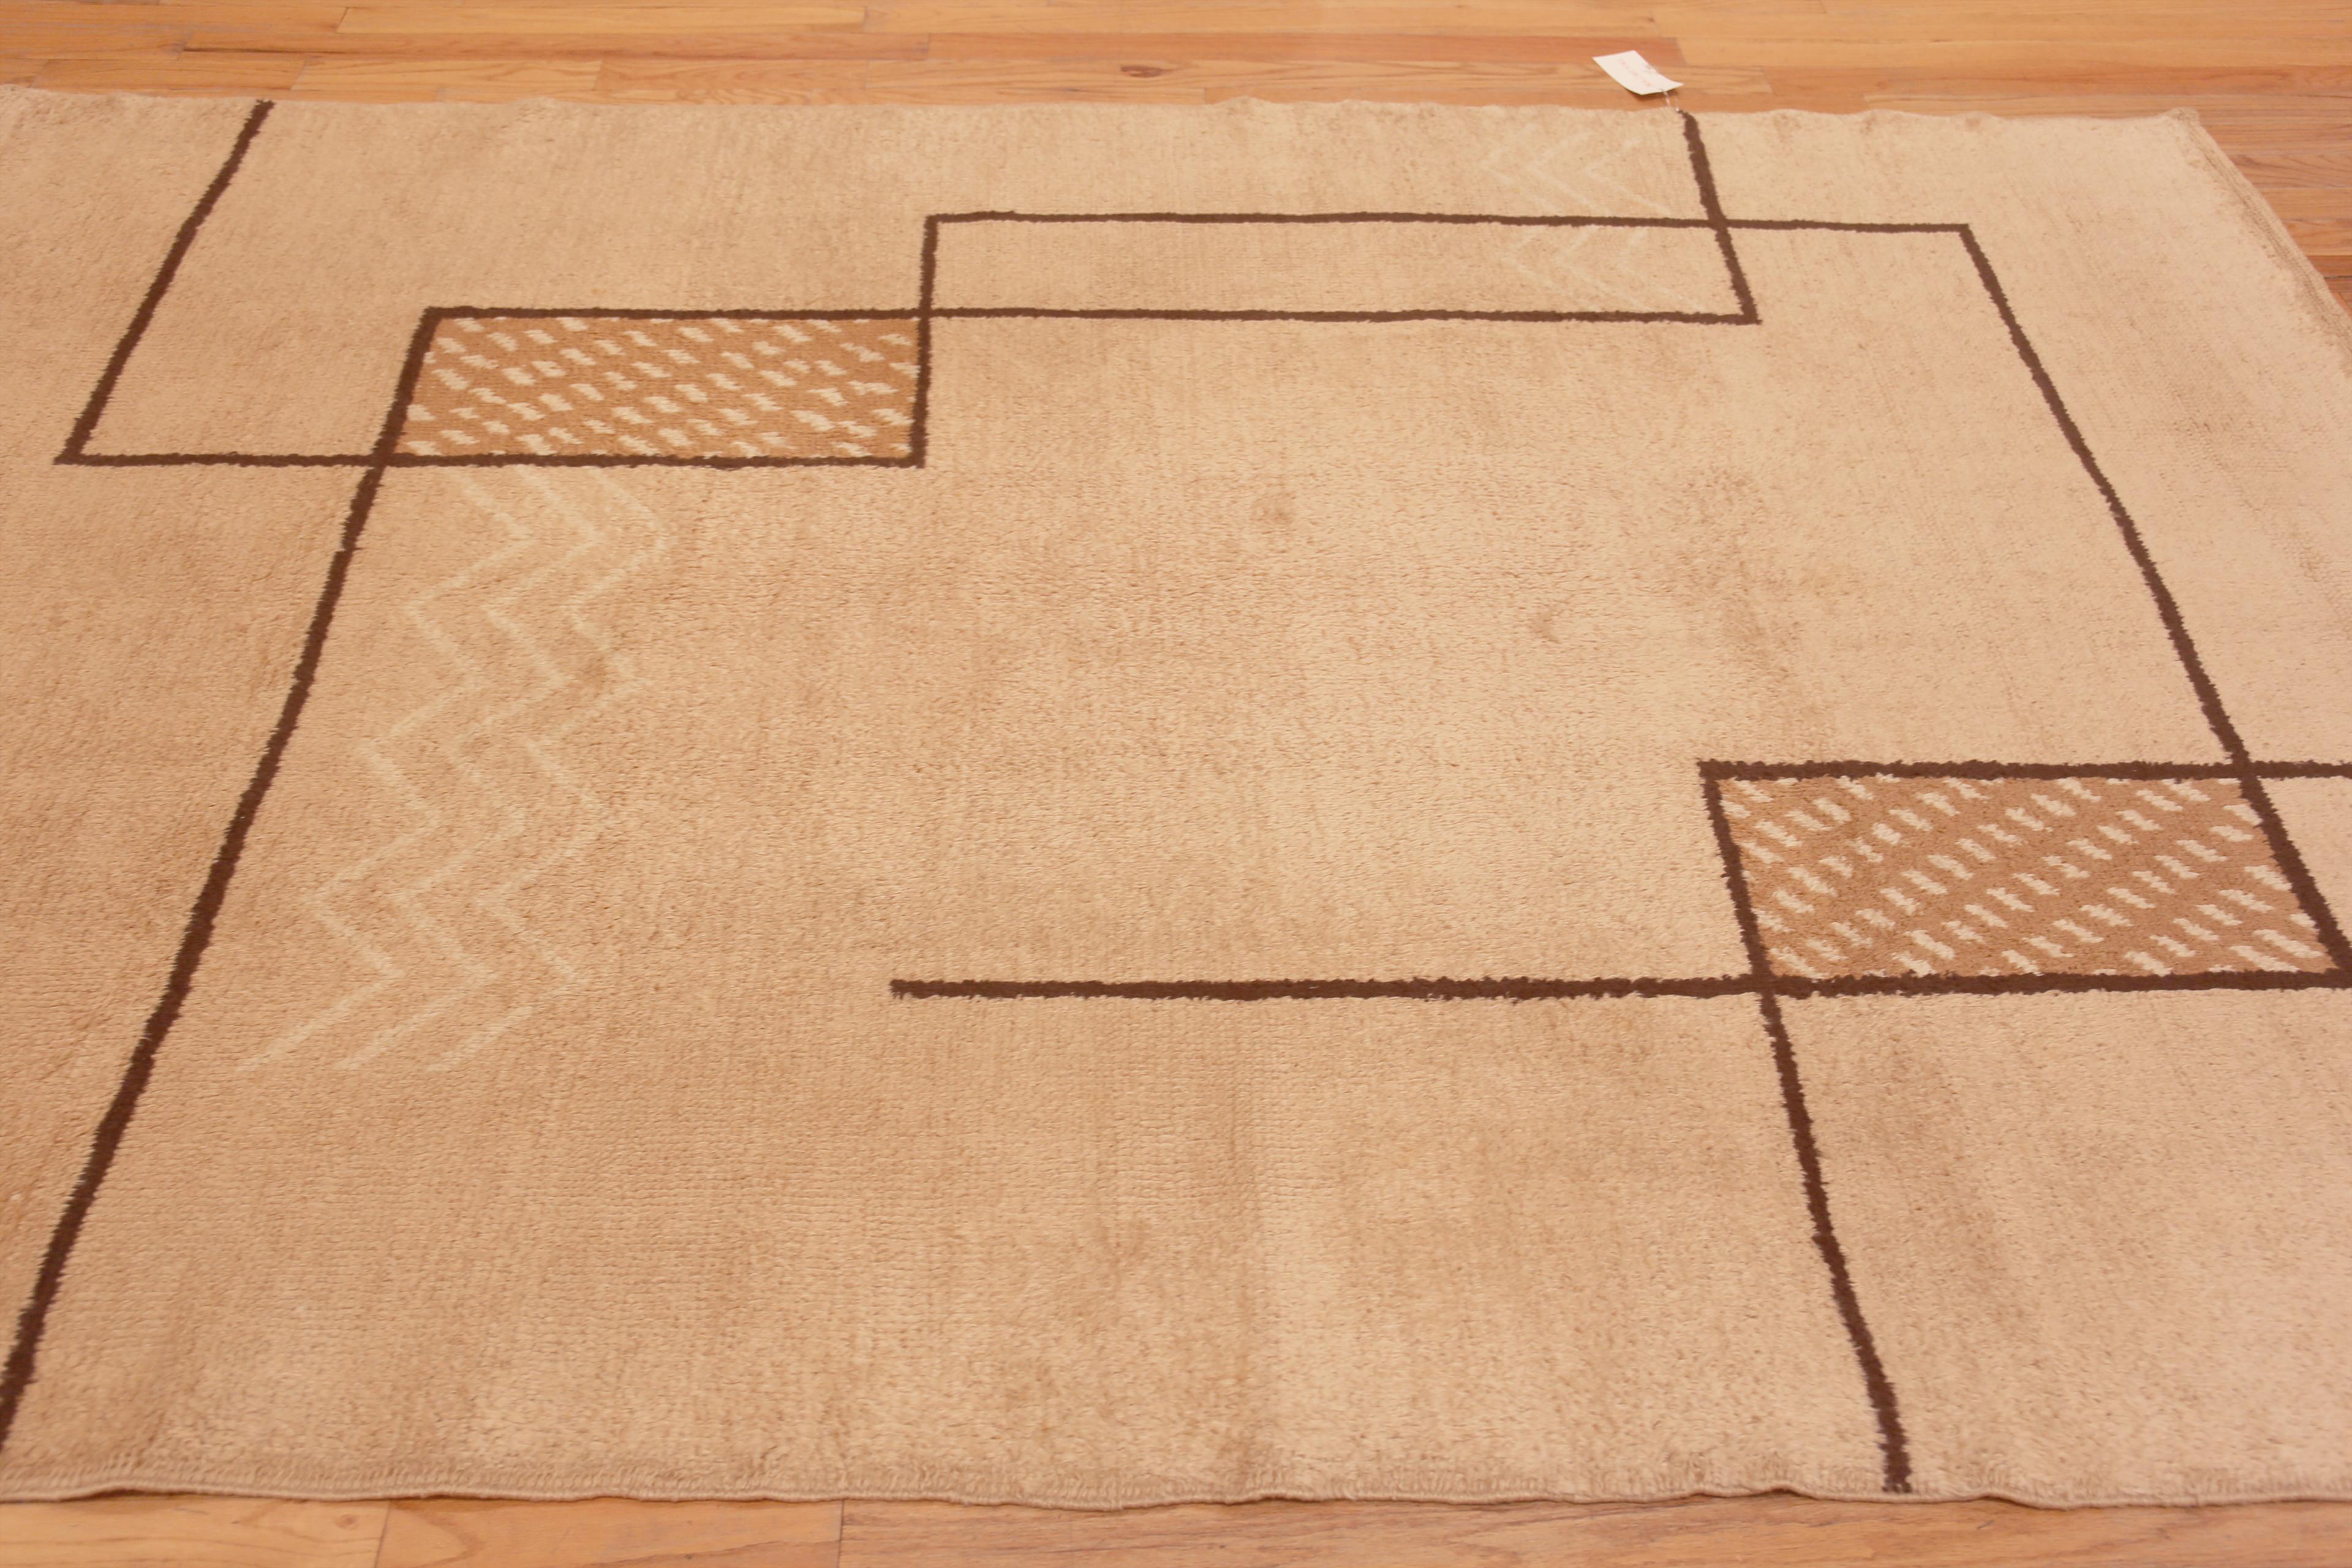 Beautifully Simplistic Geometric Antique Minimalist French Art Deco Design Area Rug, Country Of Origin / Rug Type: French Rug, Circa Date: 1930’s